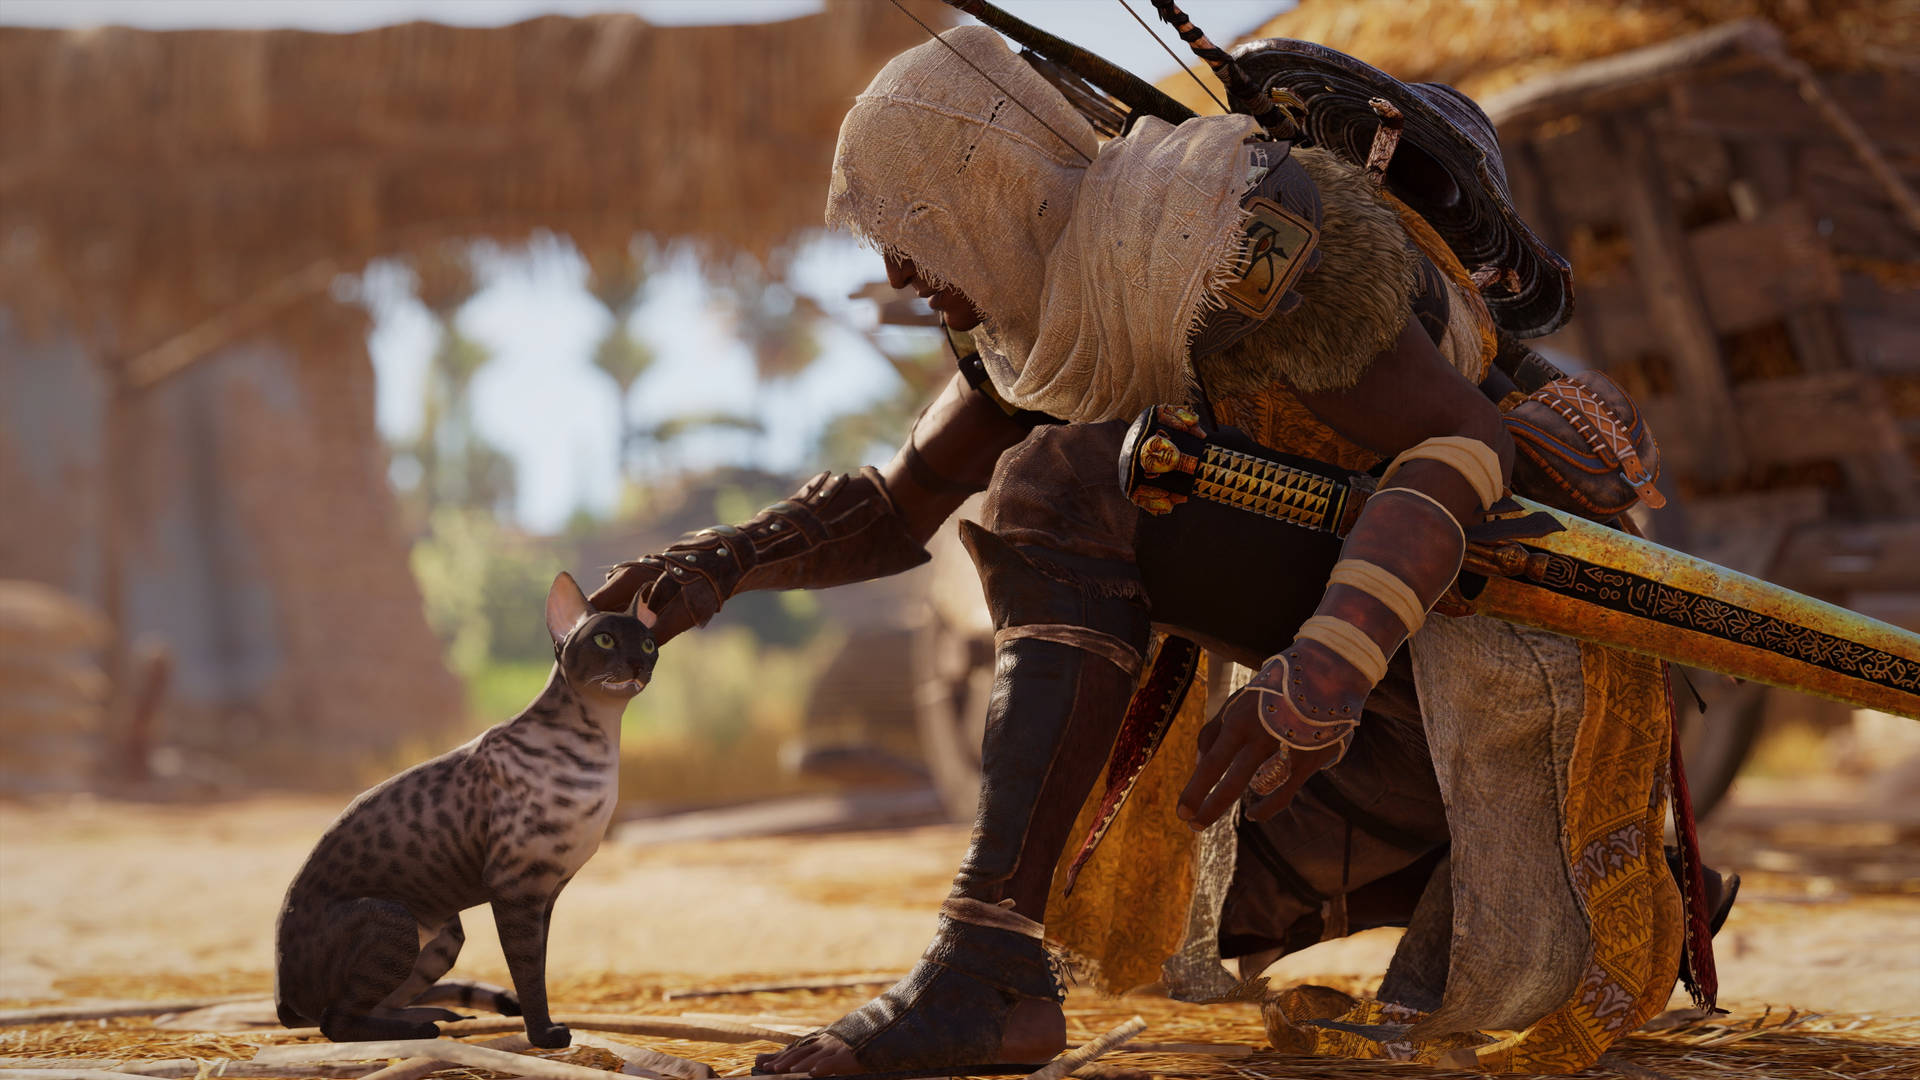 Bayek Of Siwa, The Last Medjay, With Bengal Cat In Assassin's Creed Origins Background